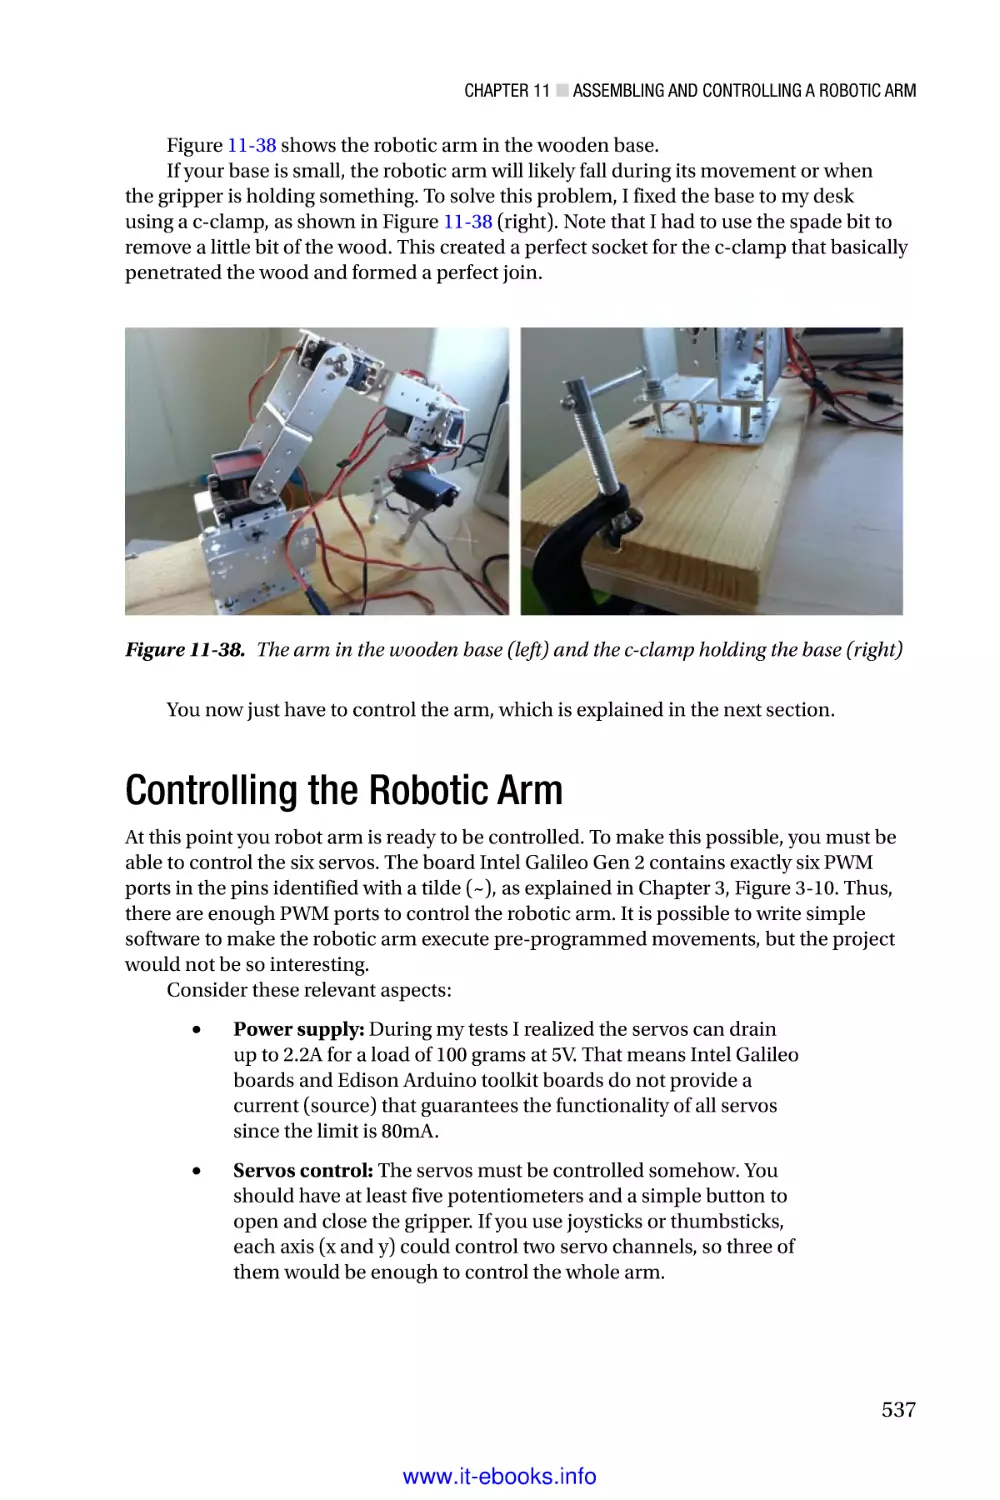 Controlling the Robotic Arm